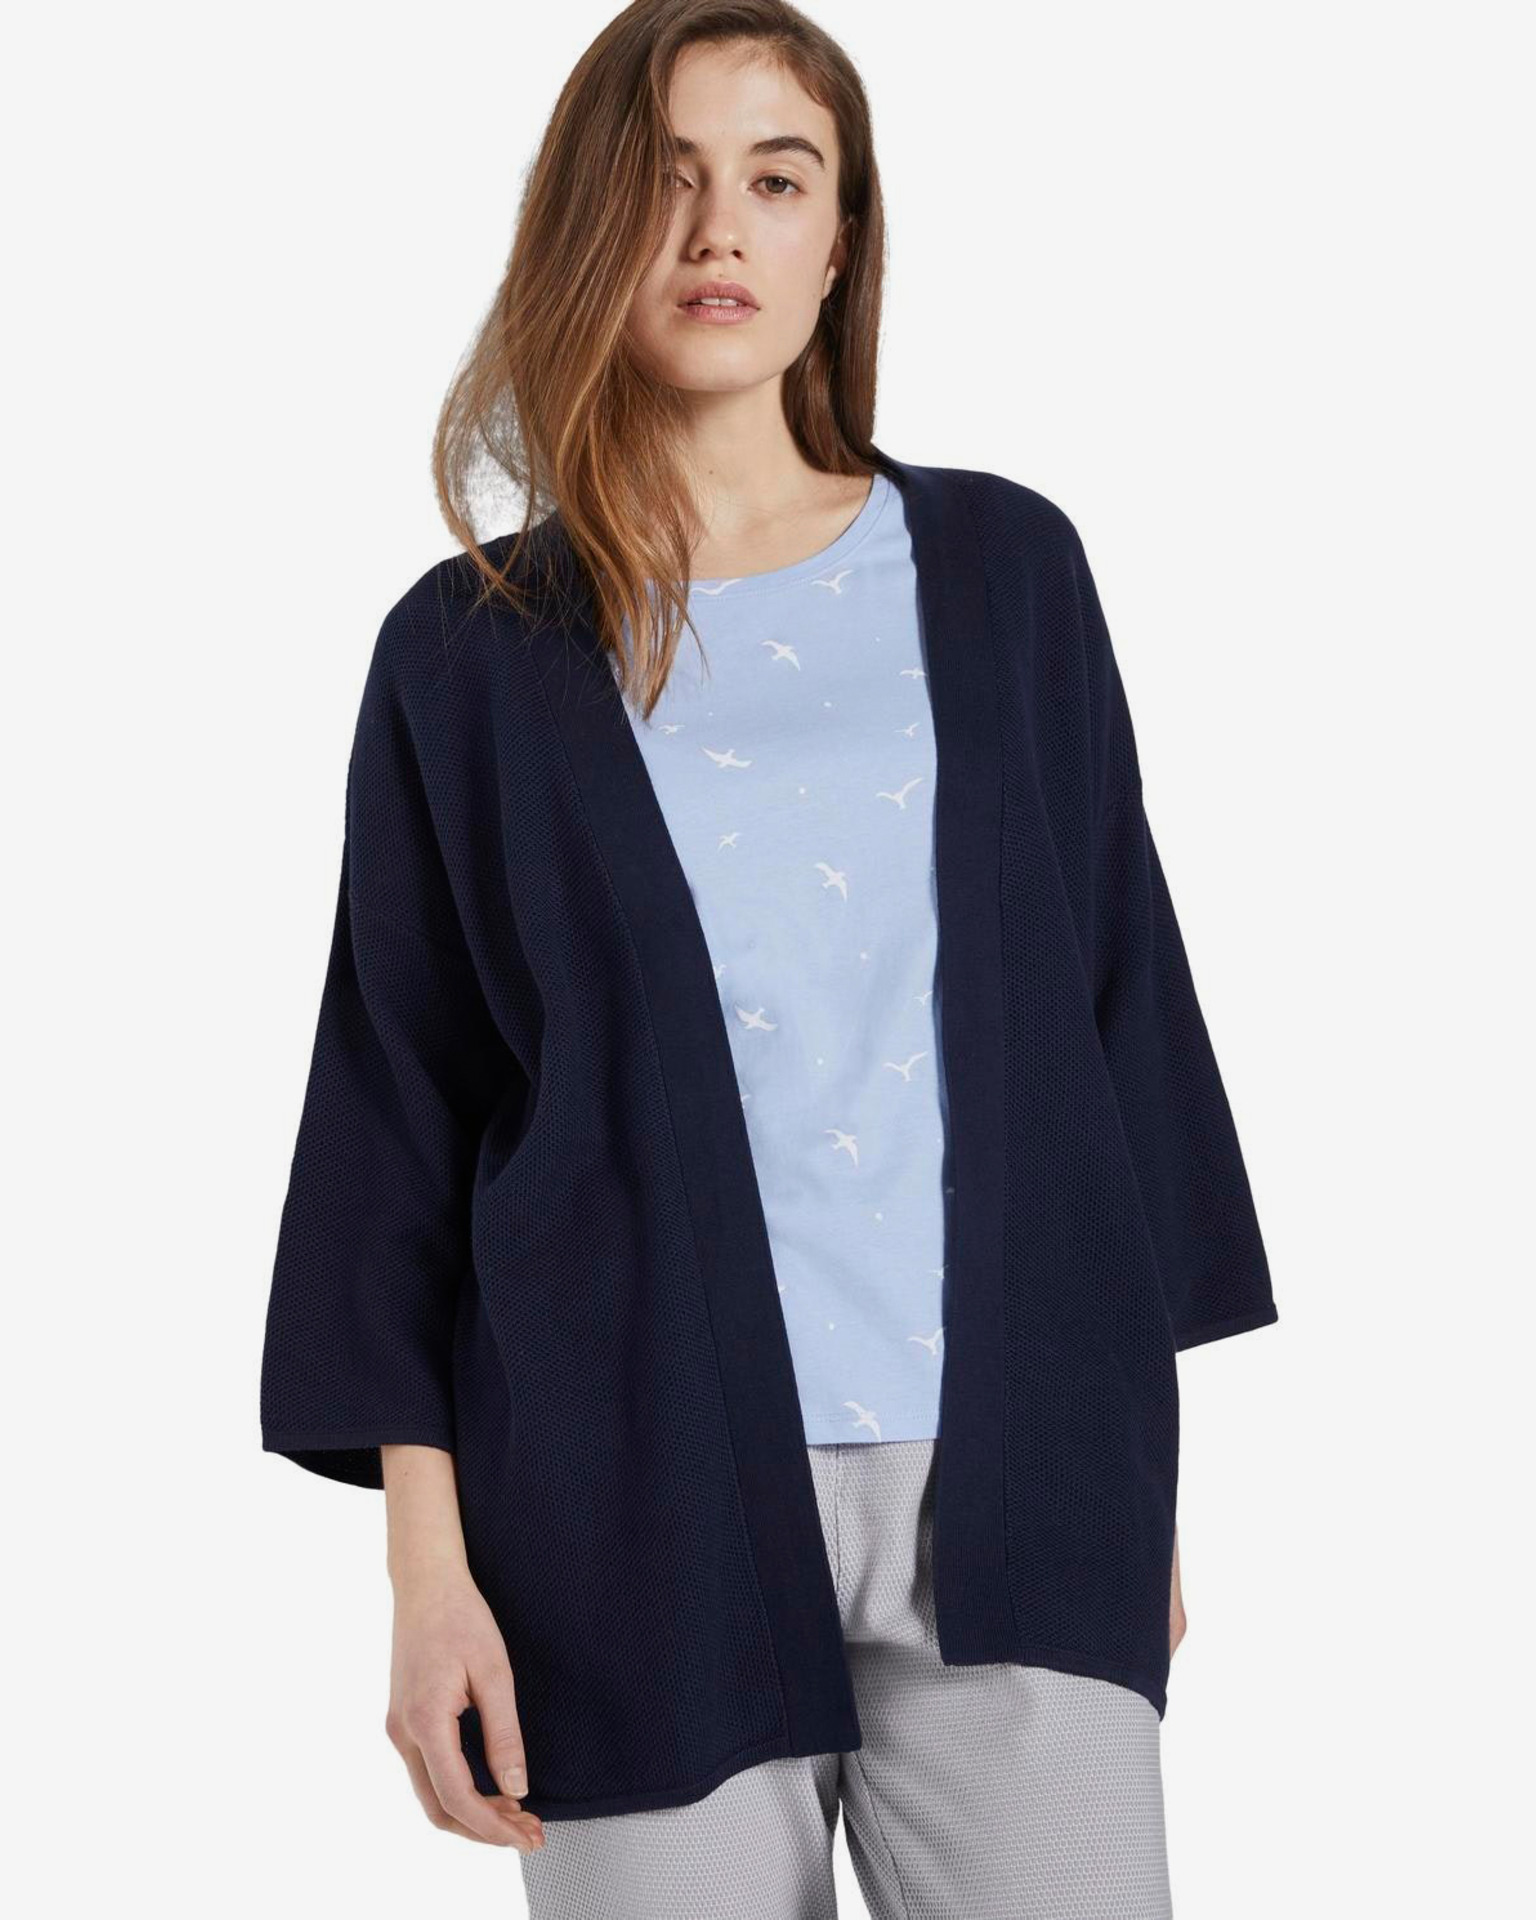 The 5 Best Cardigans For Fall Under 100$ | Sweet Passions